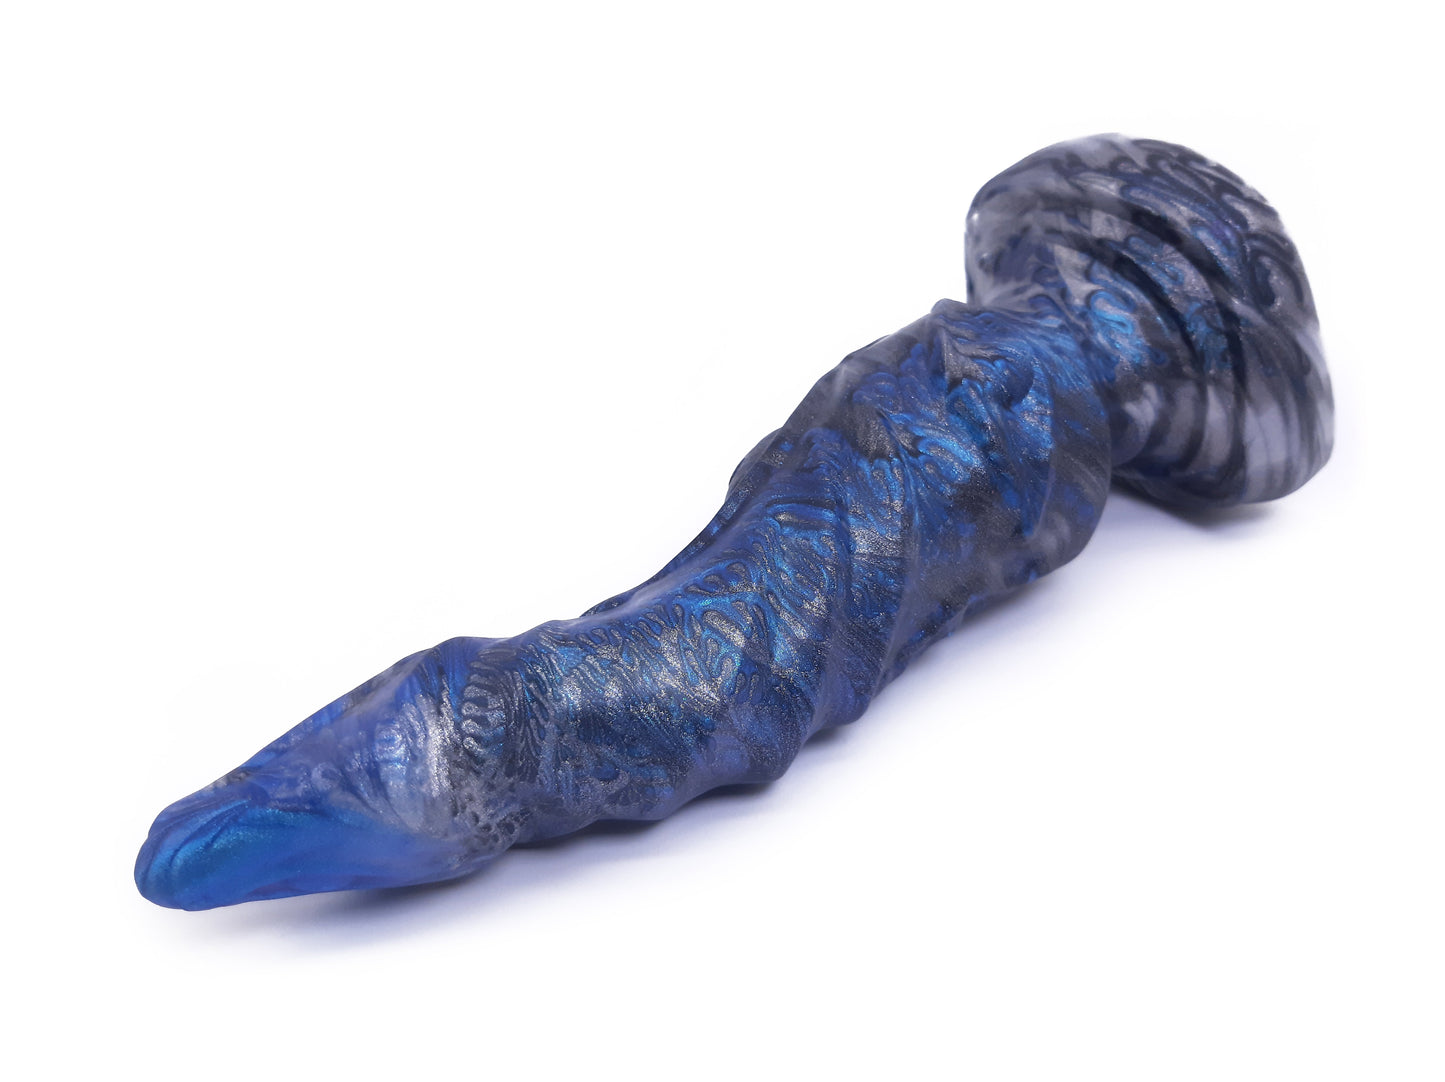 Sauron's All Seeing Eye Knotted Dildo - Small Size